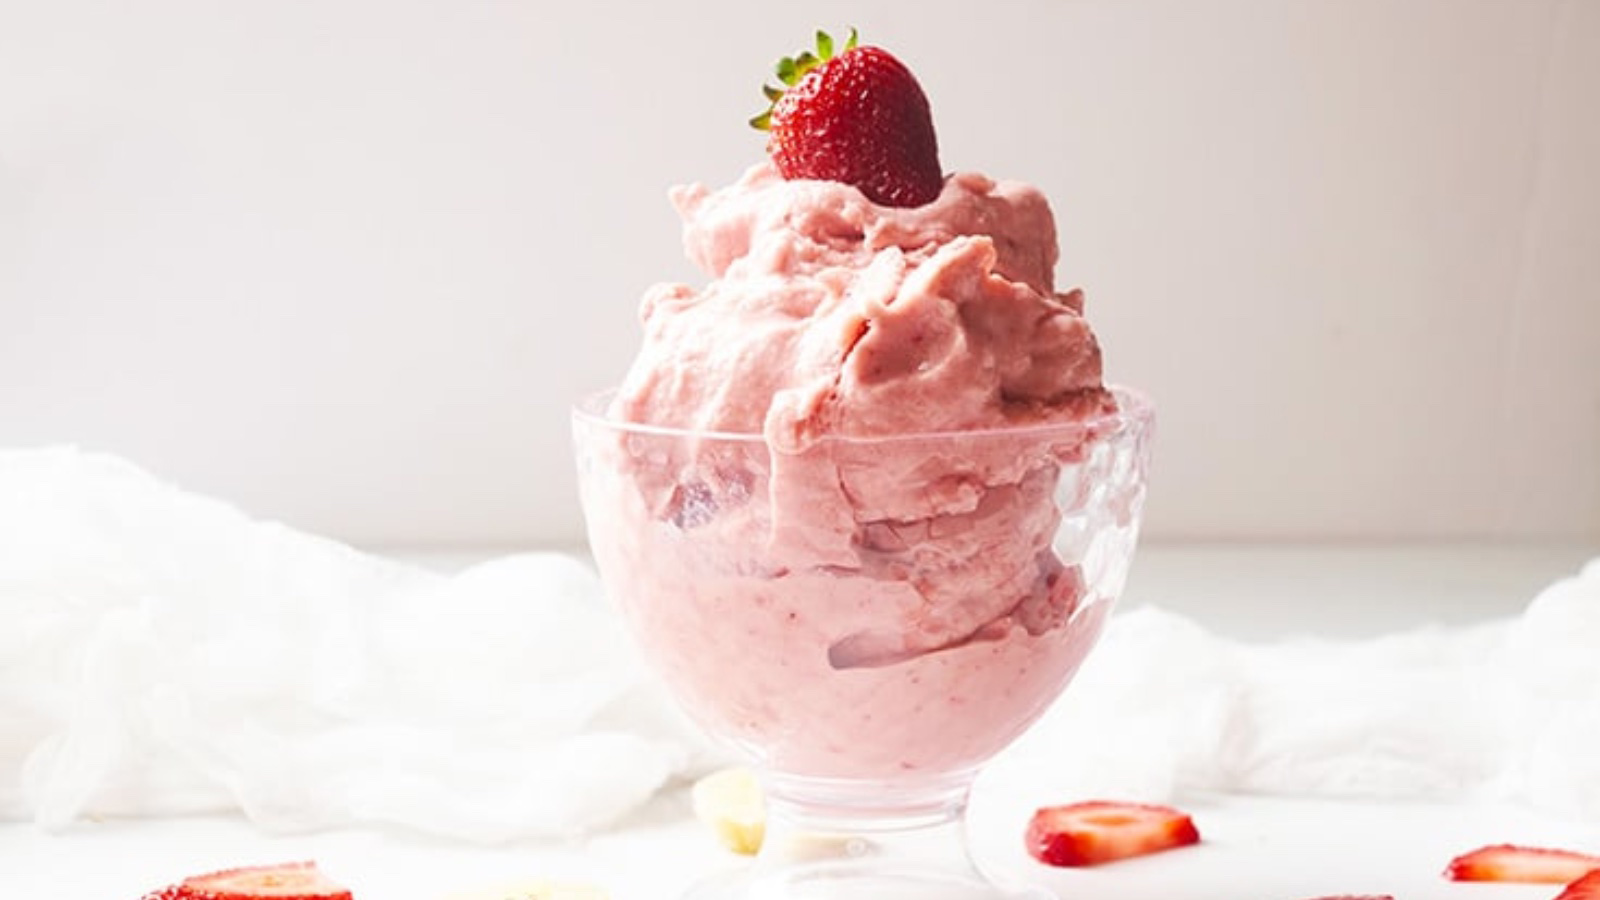 Strawberry ice cream piled high in a glass ice cream bowl and topped with a fresh strawberry.